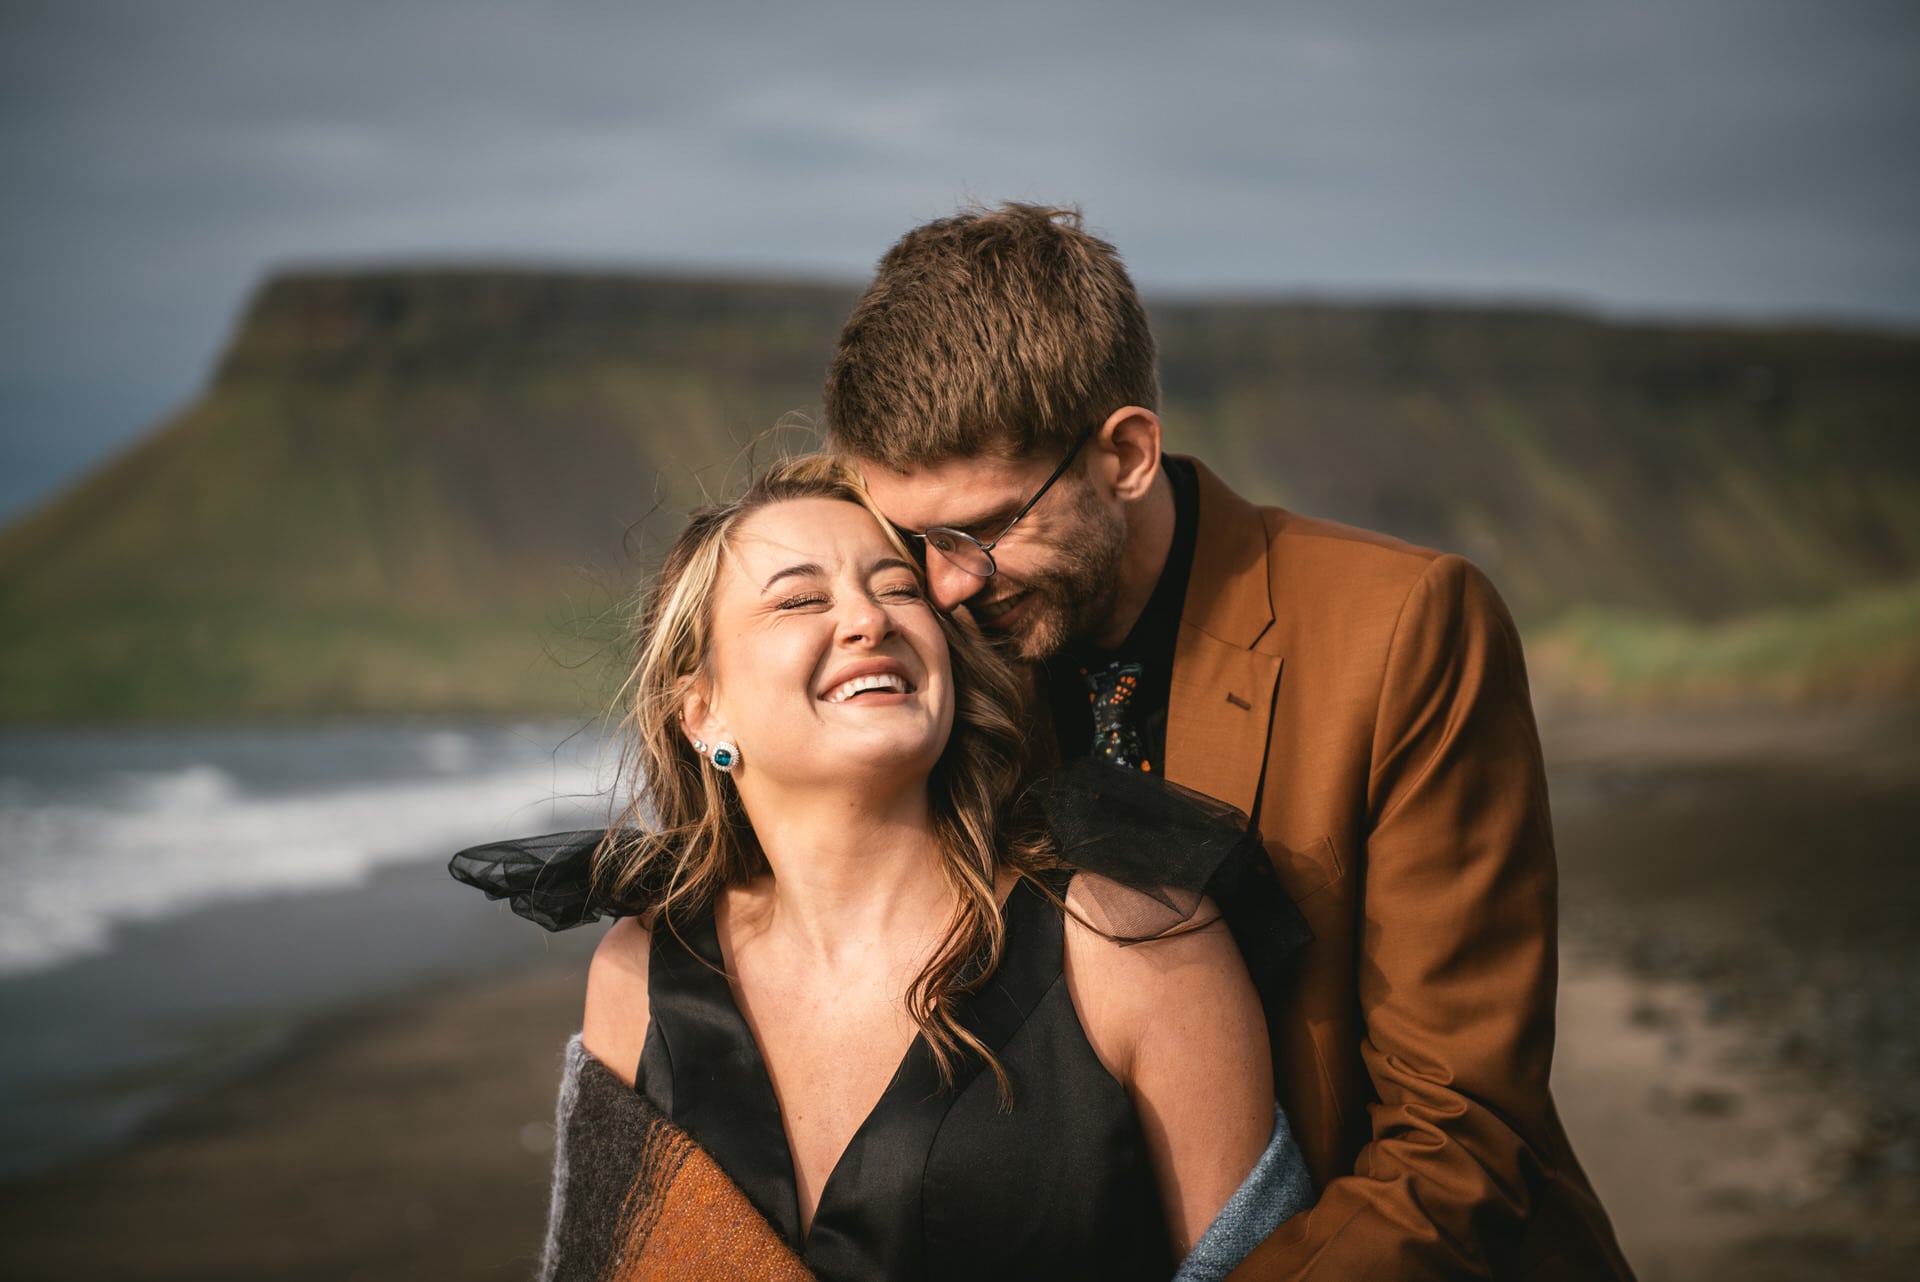 The couple's love shines brightly against the stunning backdrop of the Westfjords.